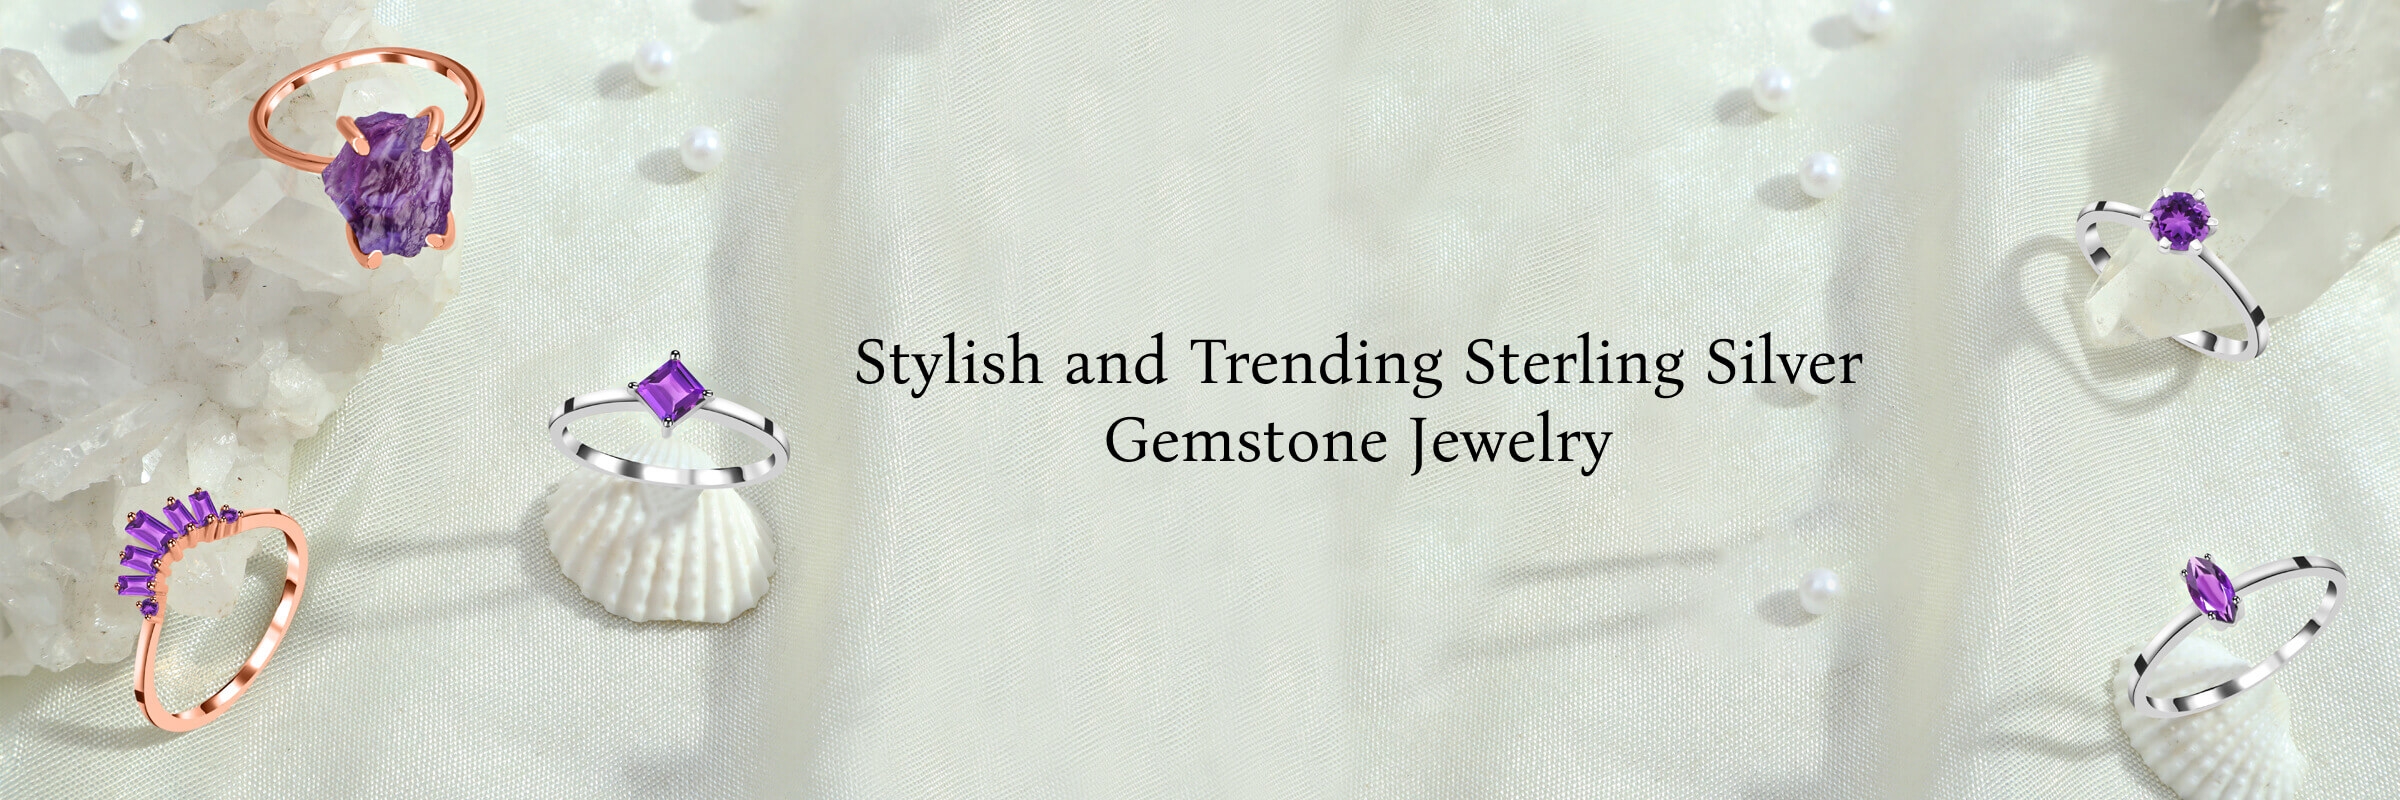 Trending Sterling Silver Gemstone Jewelry to Carry at Work 1